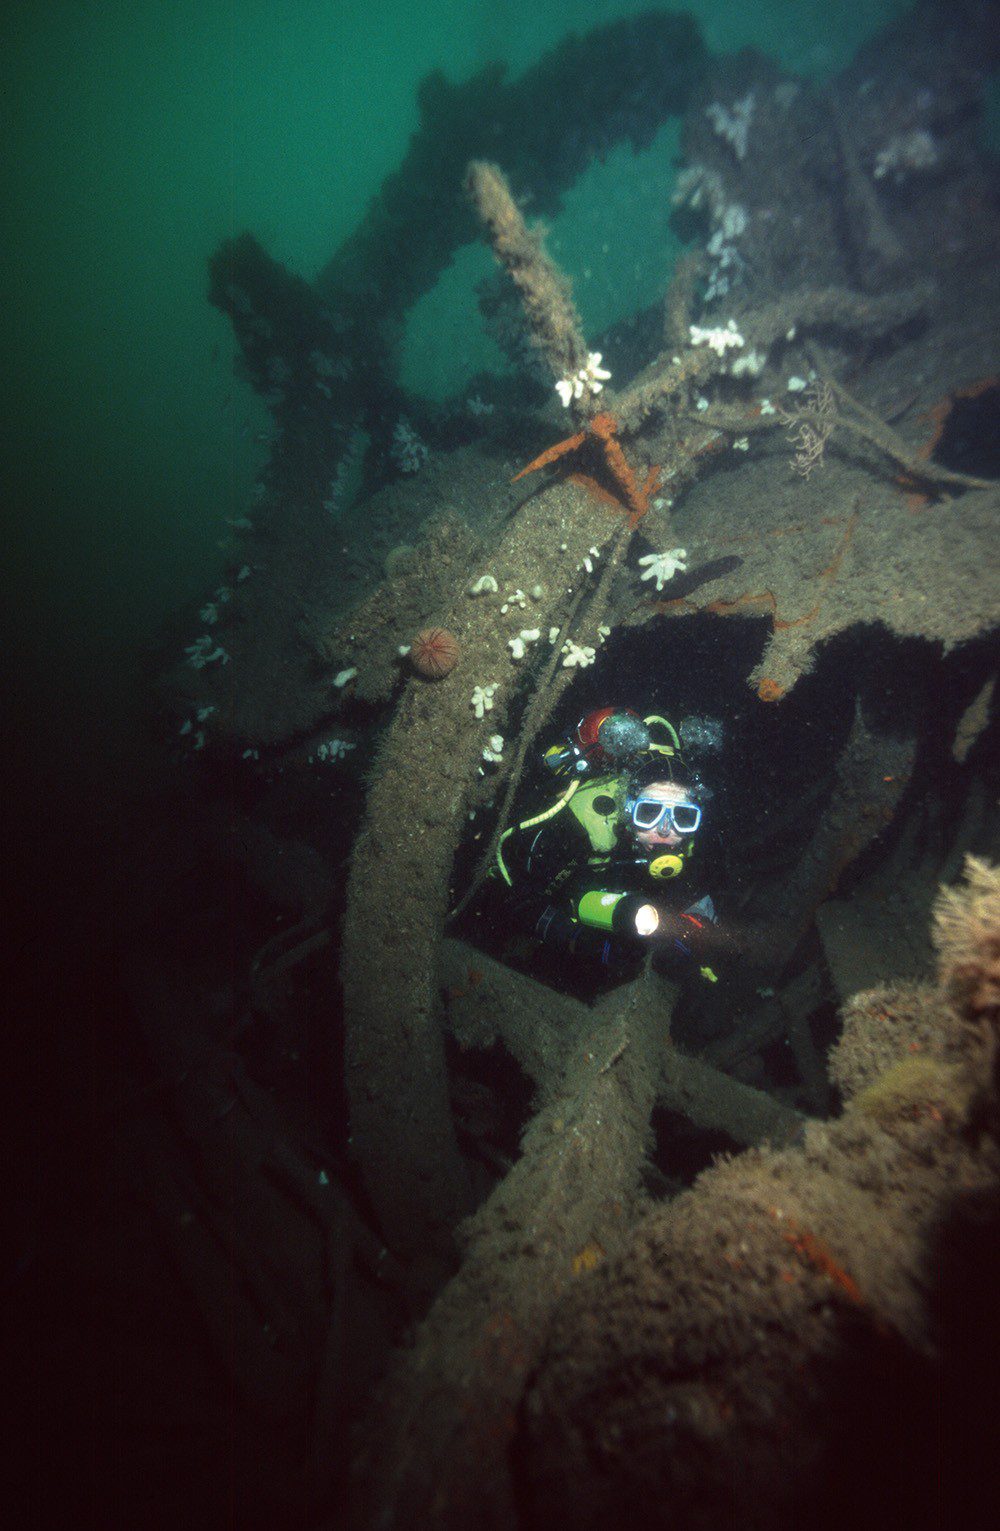 Swimming through the propeller-shaft tunnel of the Persier.